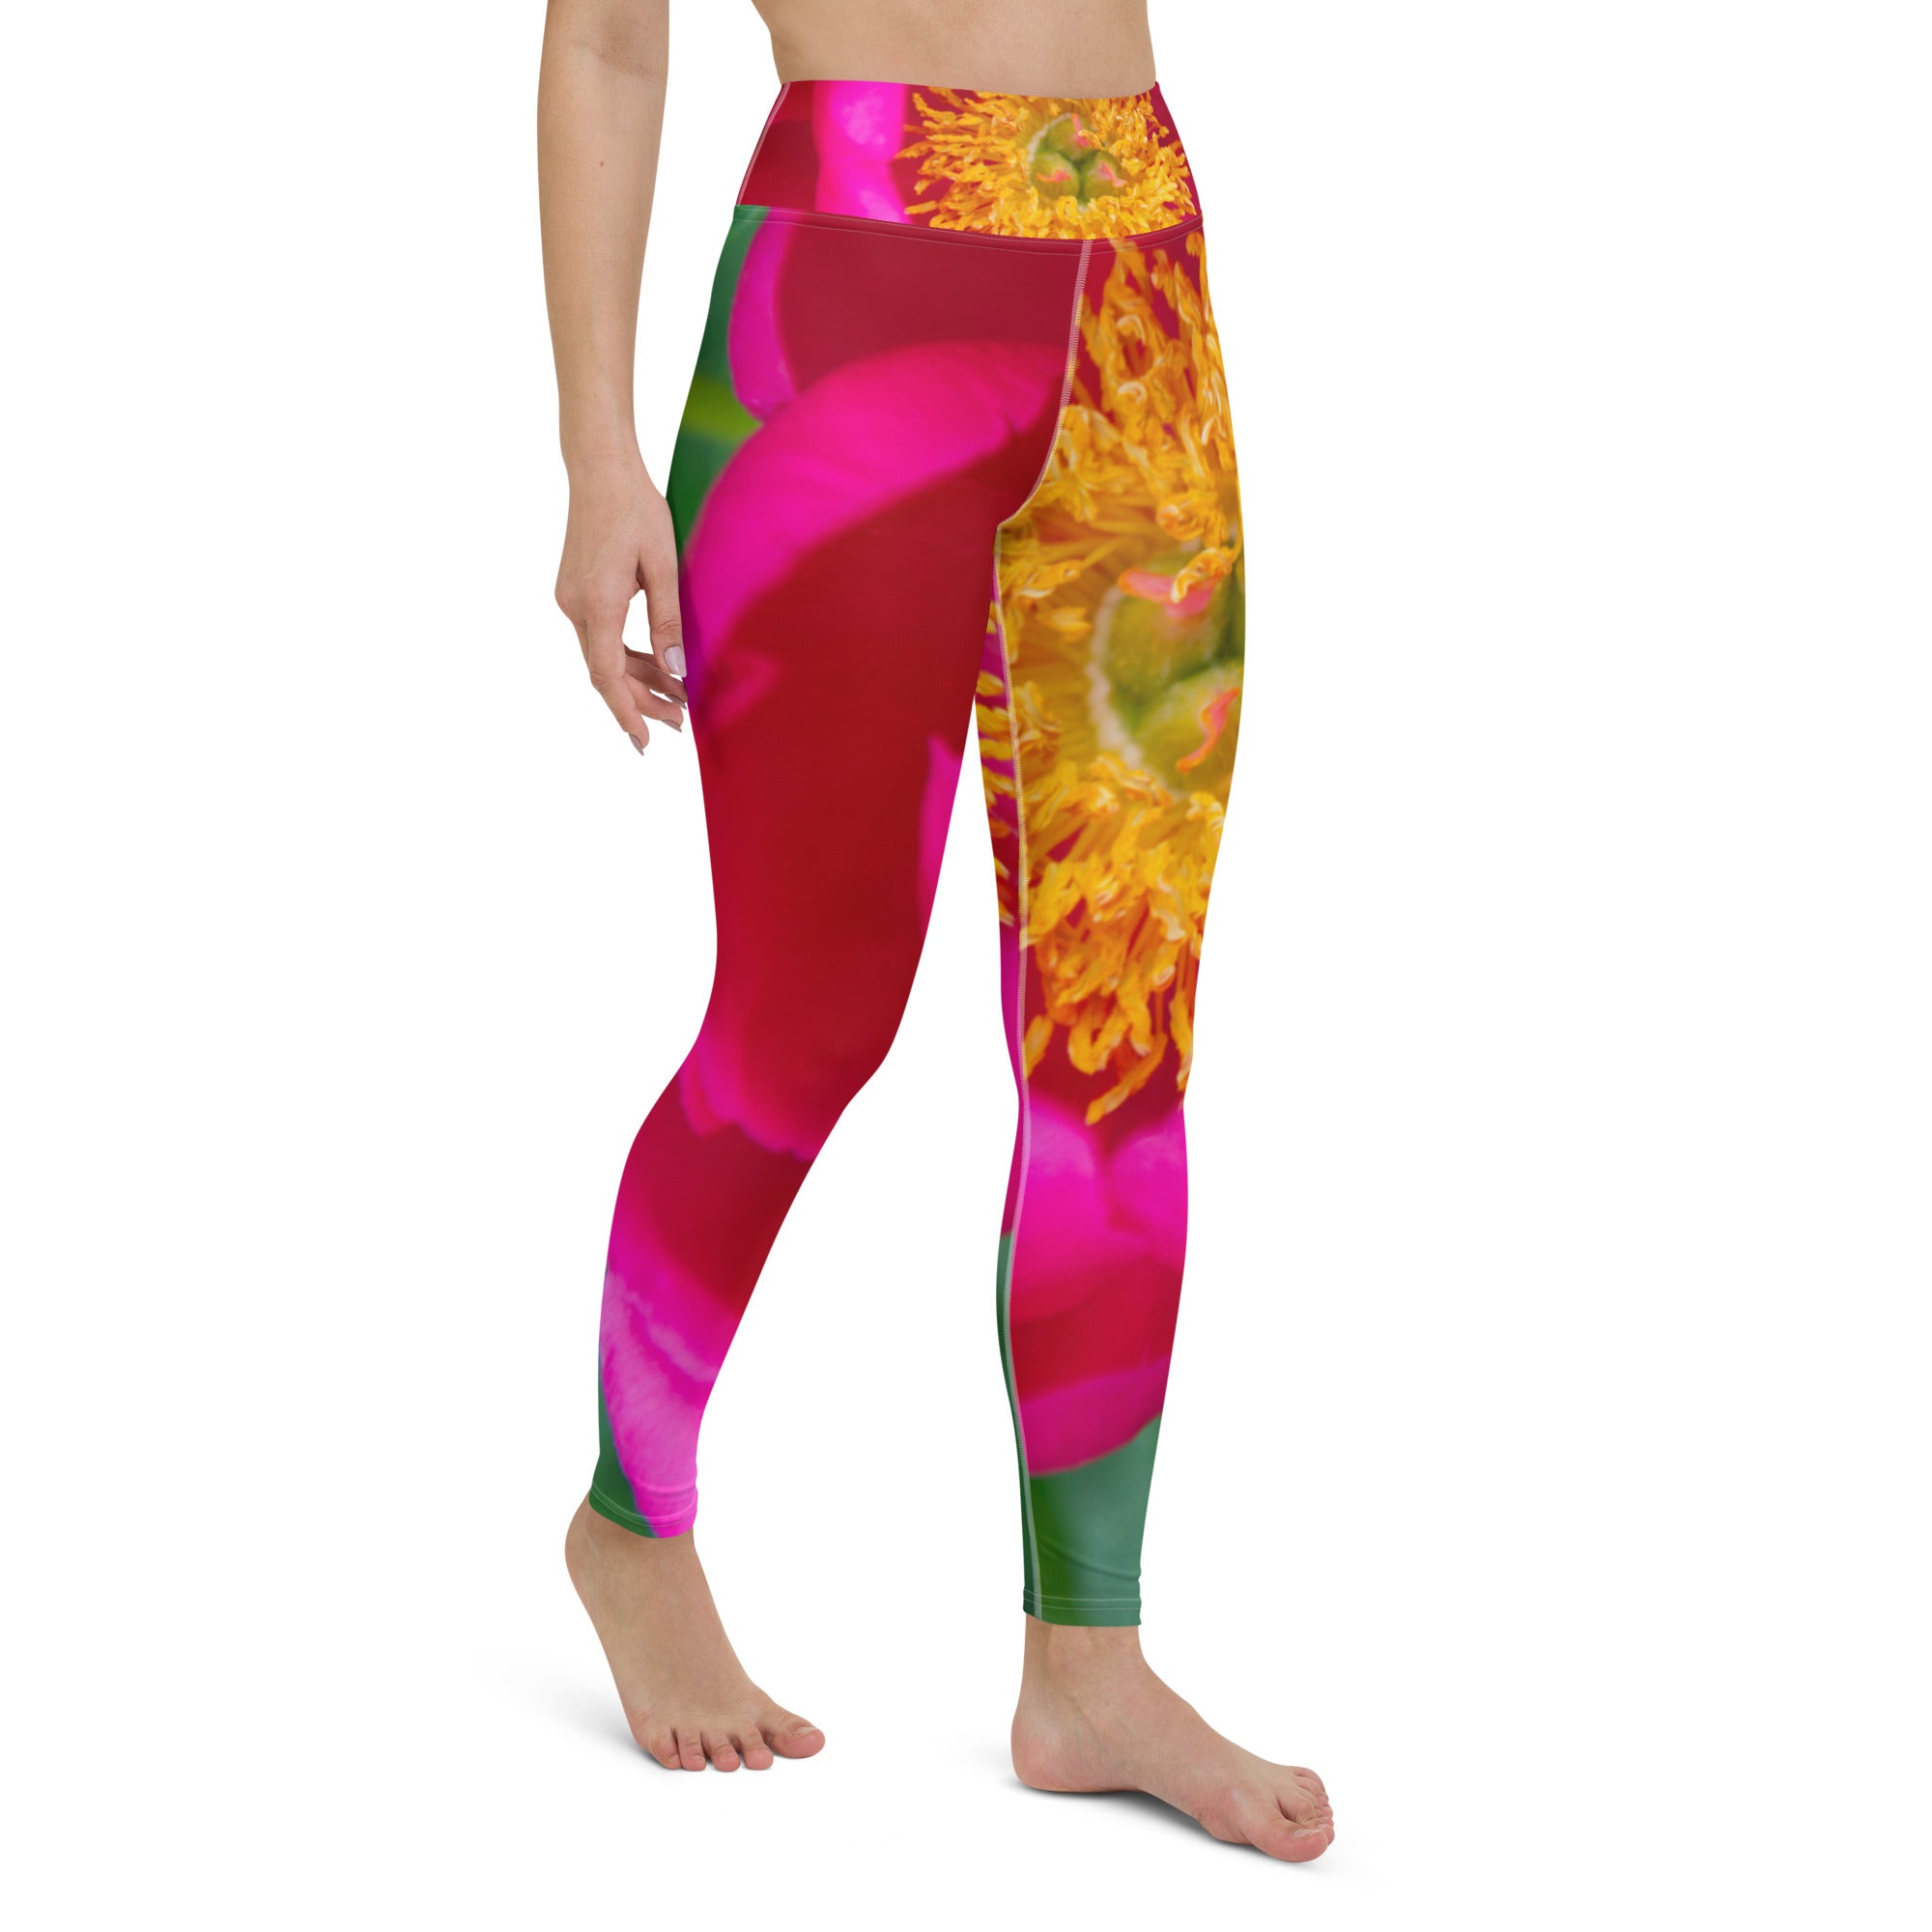 Bewitched Yoga Leggings